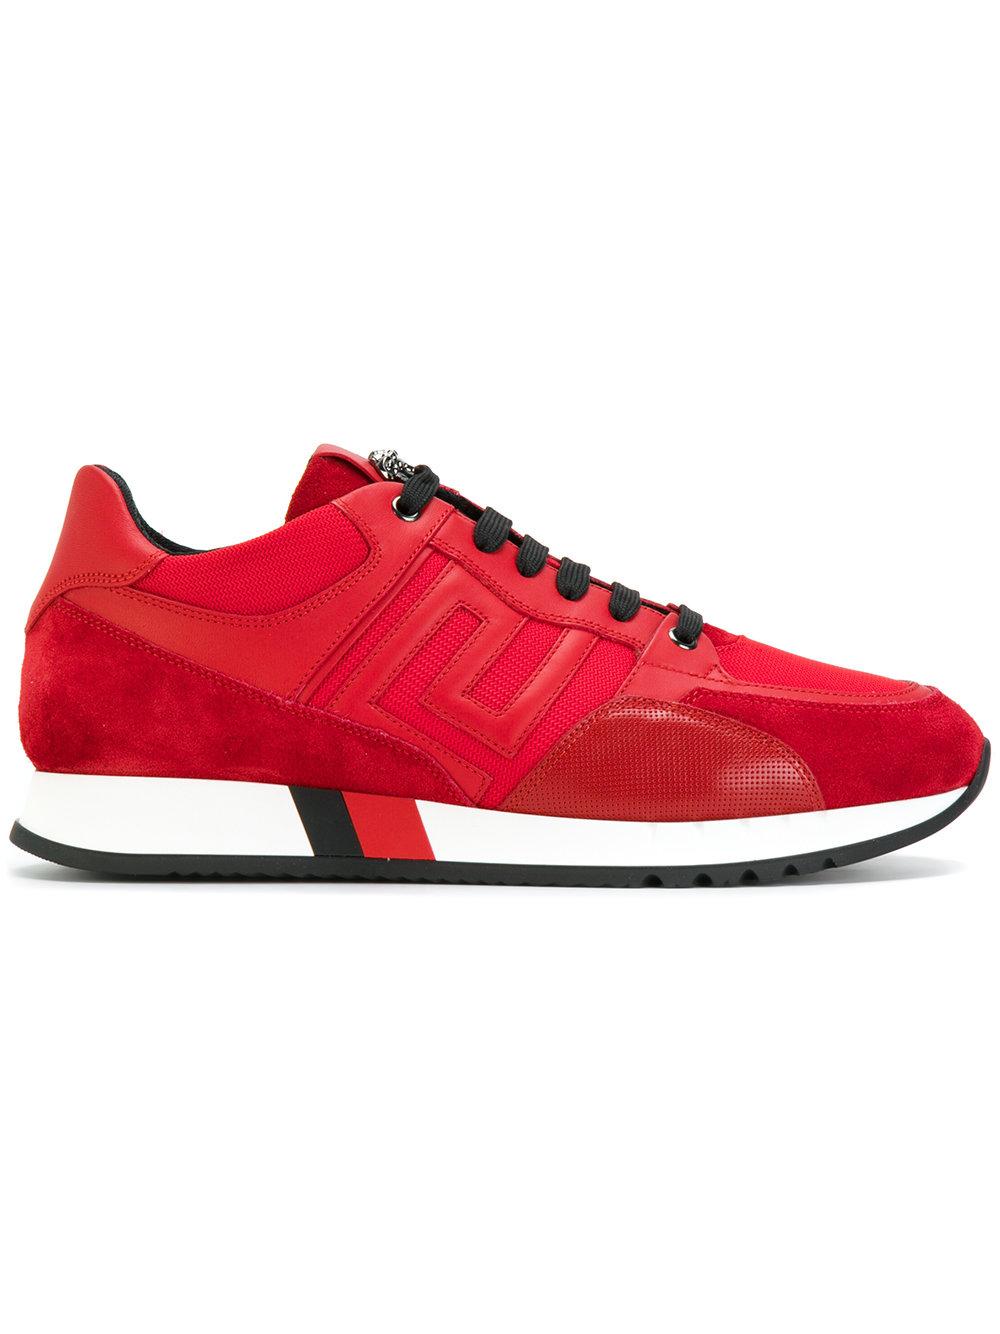 Versace Leather Greek Key Running Shoes in Red for Men - Lyst